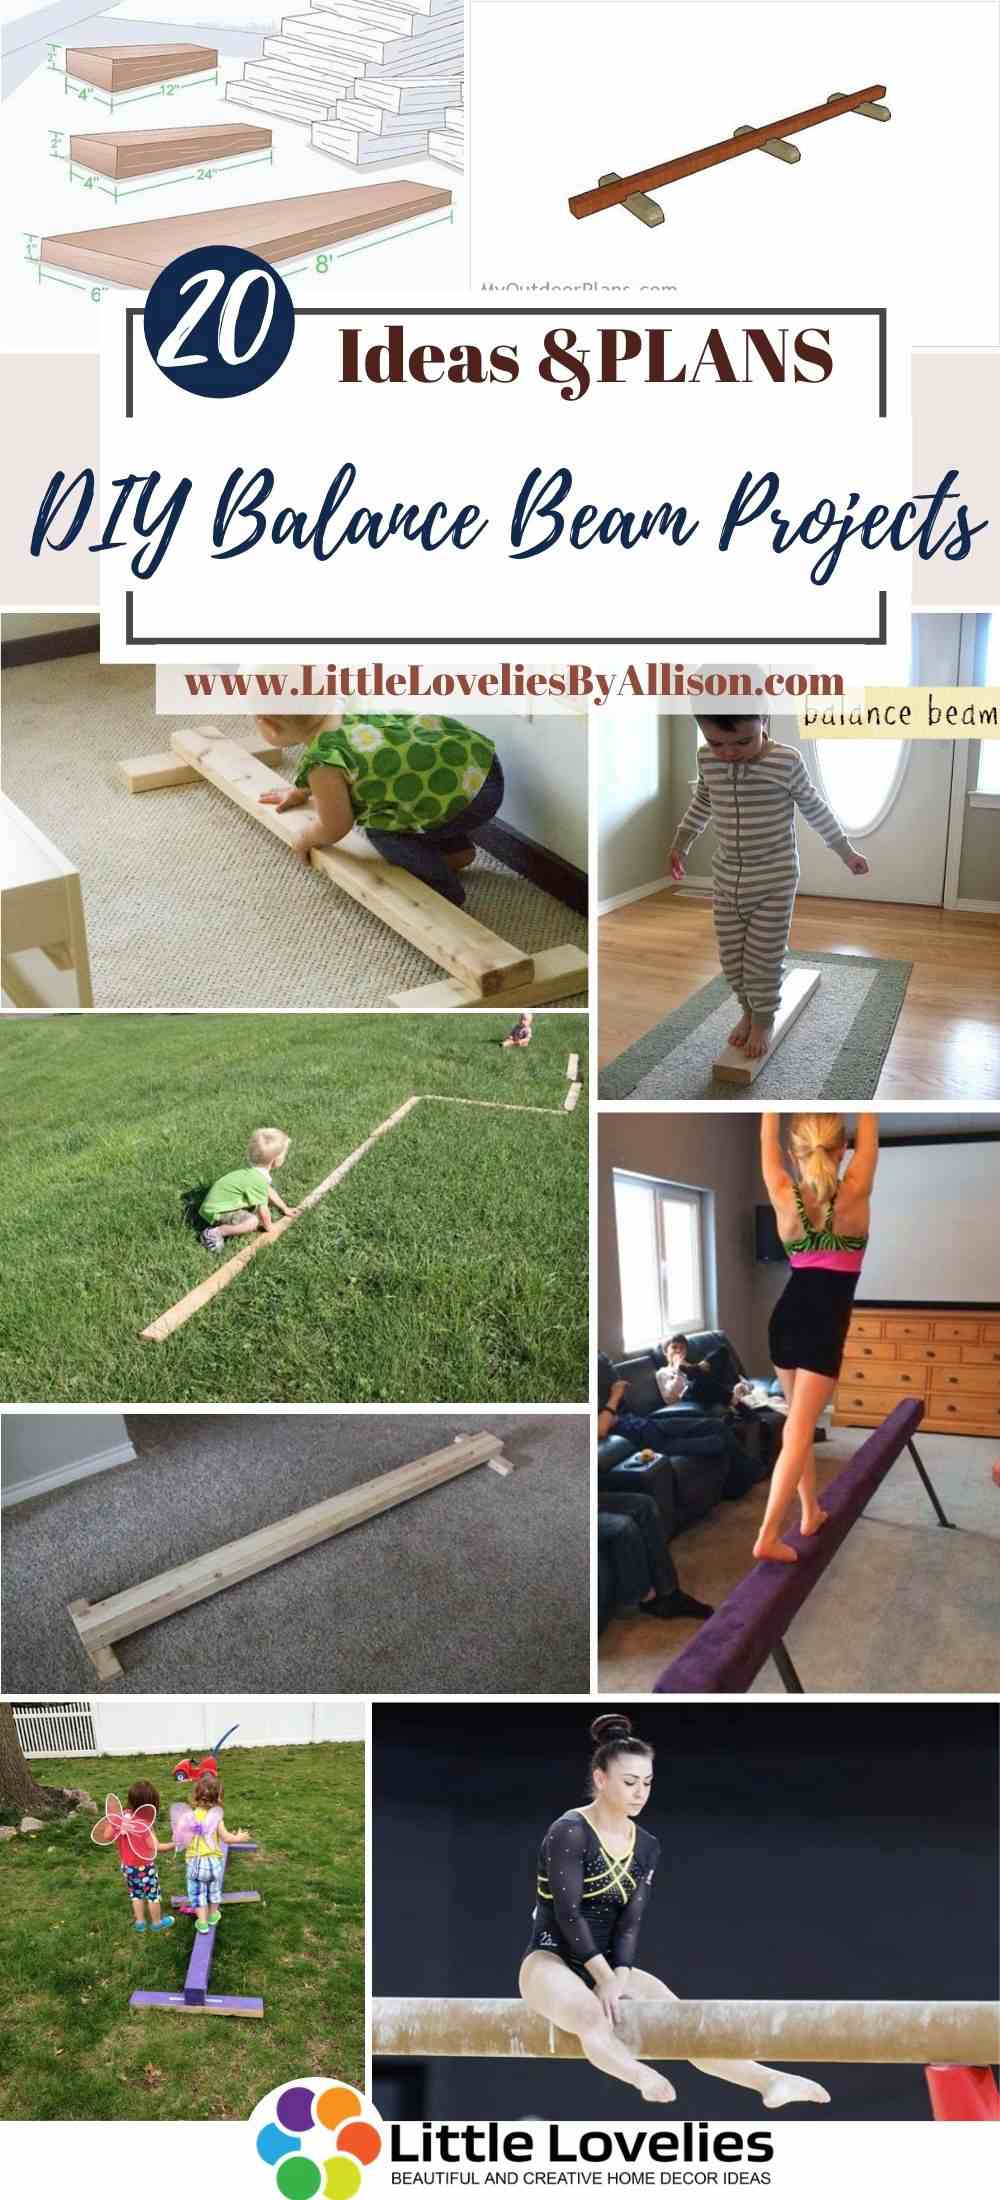 20 Diy Balance Beam Projects How To Build A